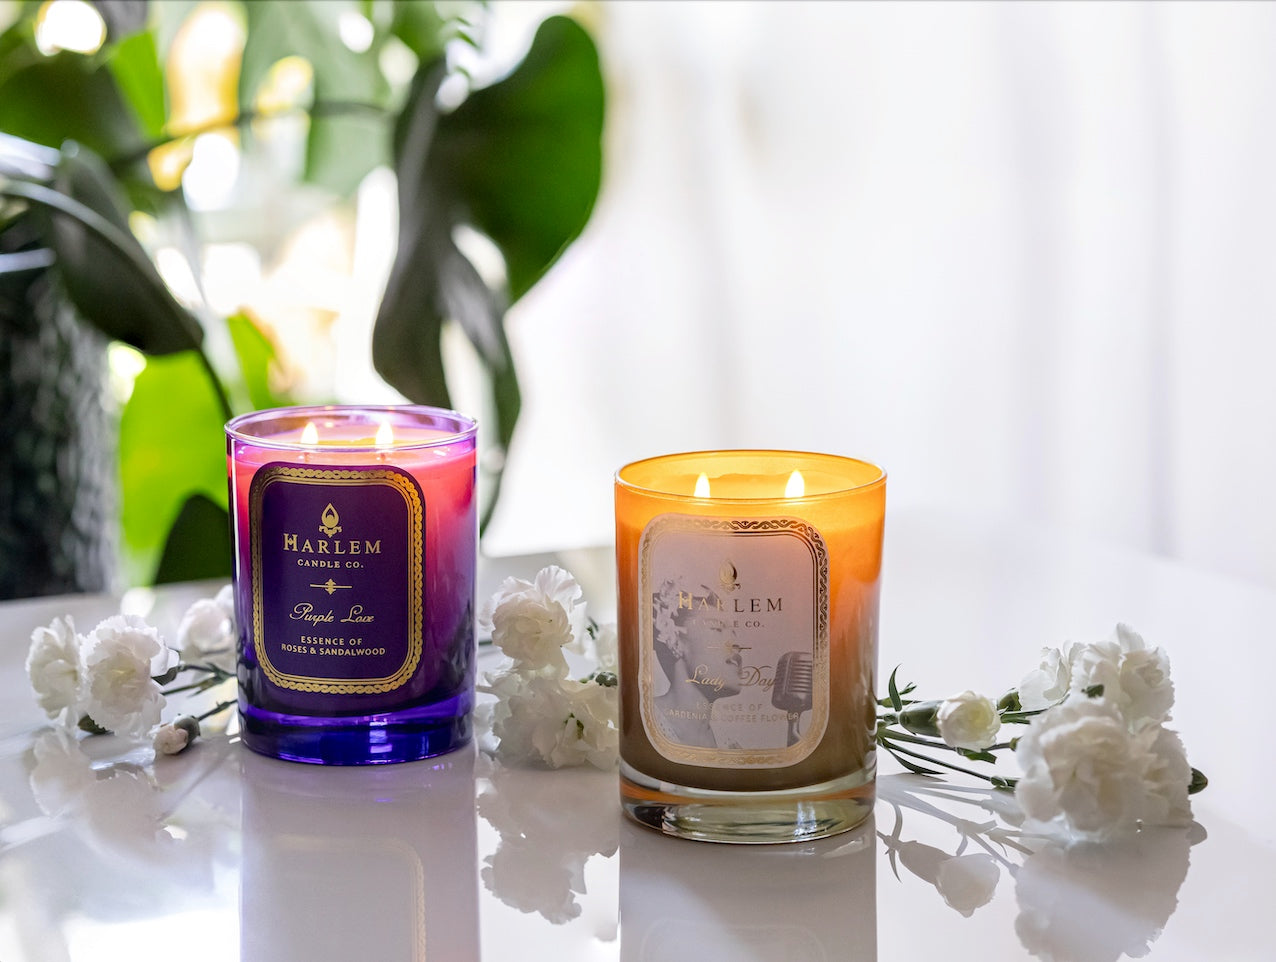  This is an image of our Purple Love and gold and white Lady Day candles in a lifestyle setting where they are surrounded by green plants and white flowers.